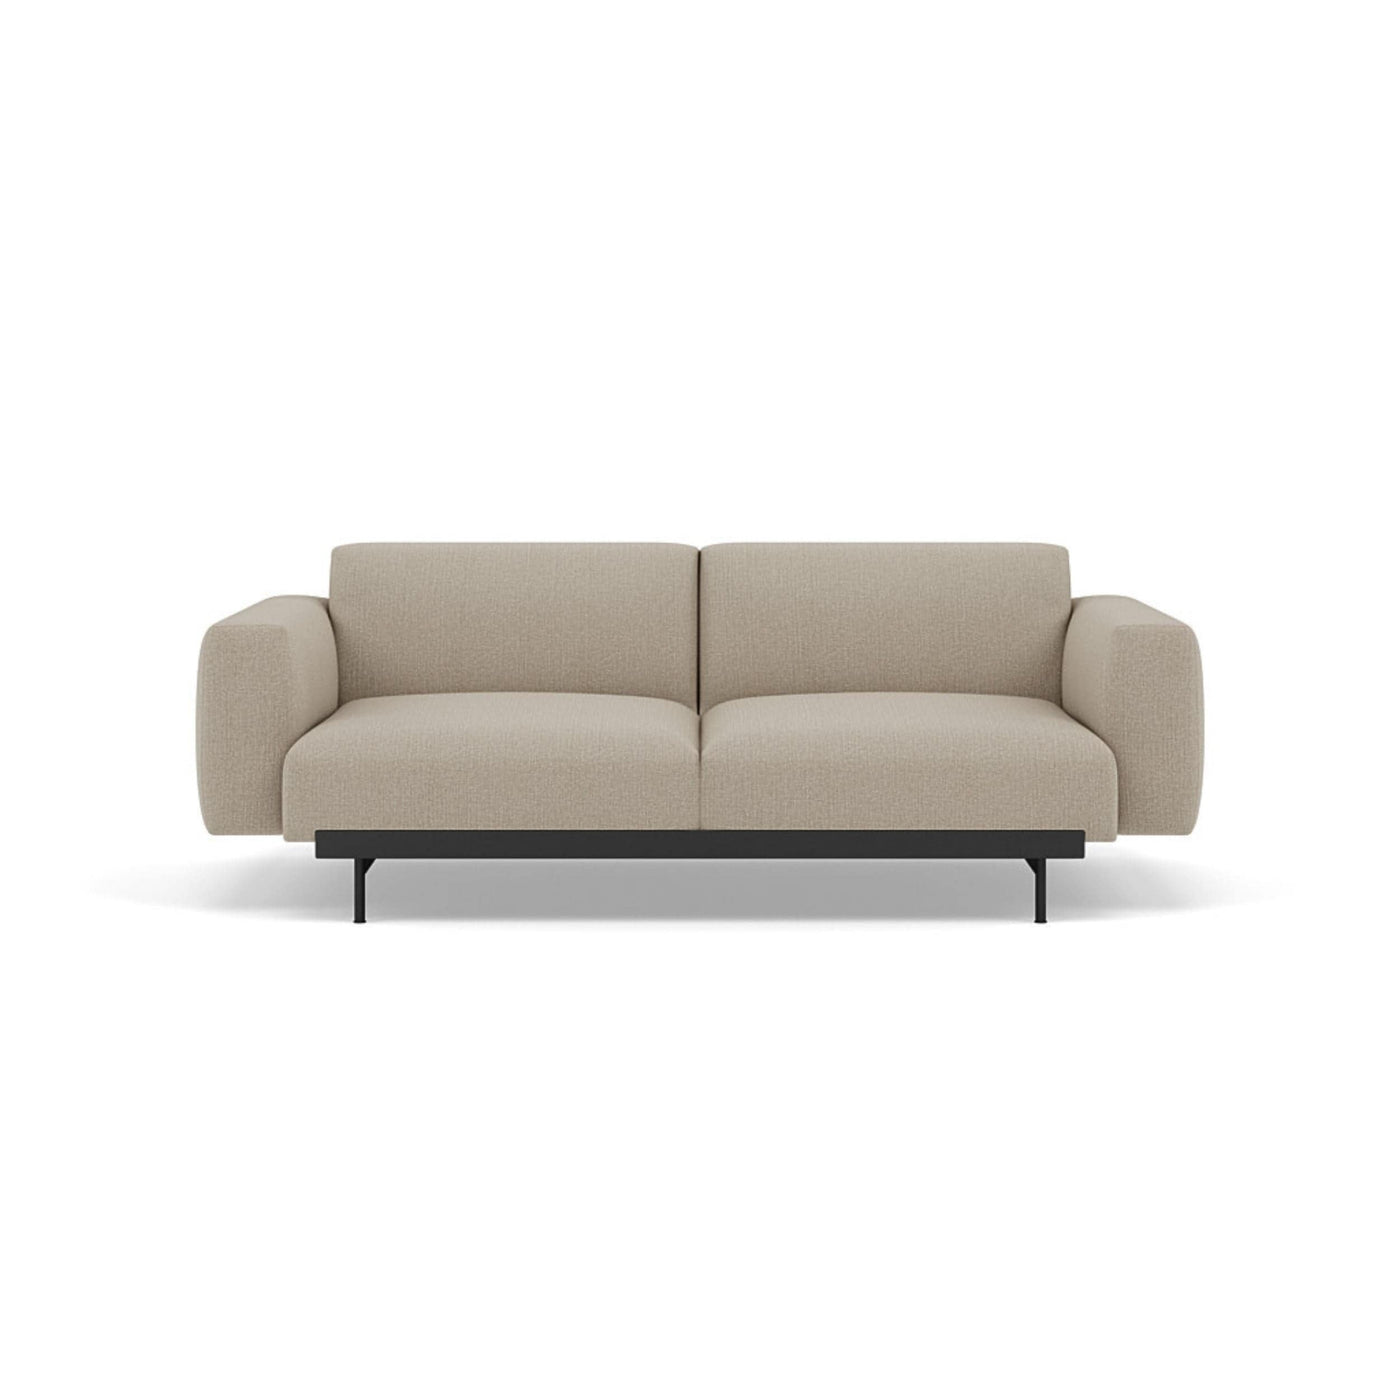 Muuto In Situ Modular 2 Seater Sofa, configuration 1. Made to order from someday designs #colour_clay-10